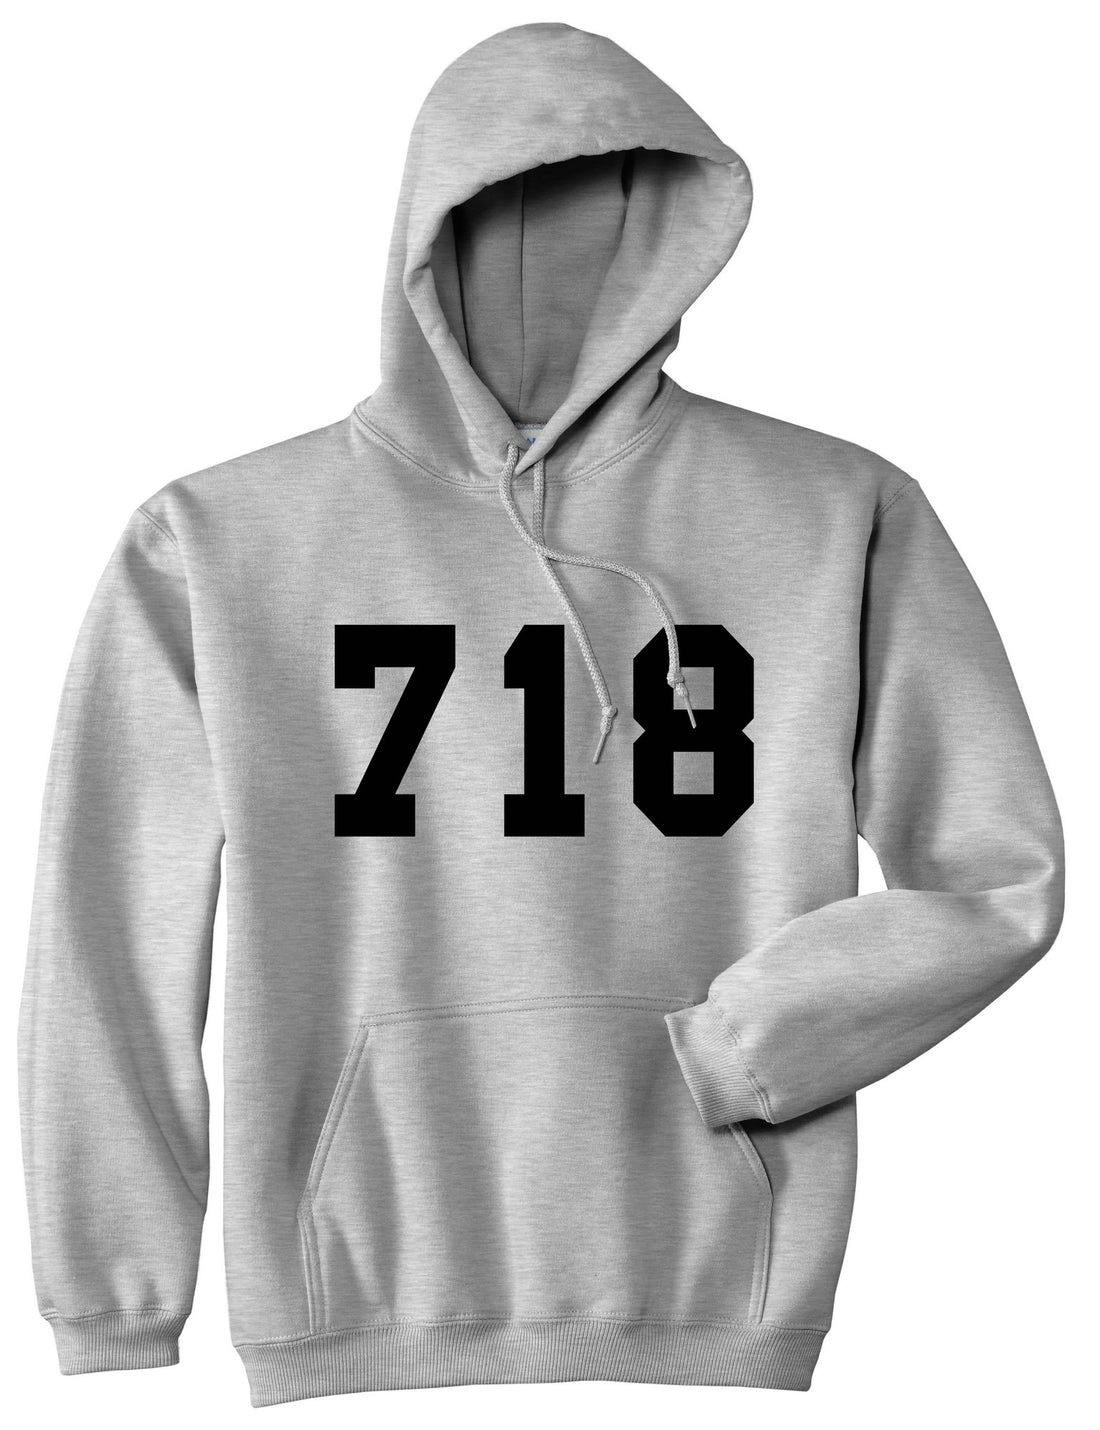 718 New York Area Code Pullover Hoodie in Grey By Kings Of NY